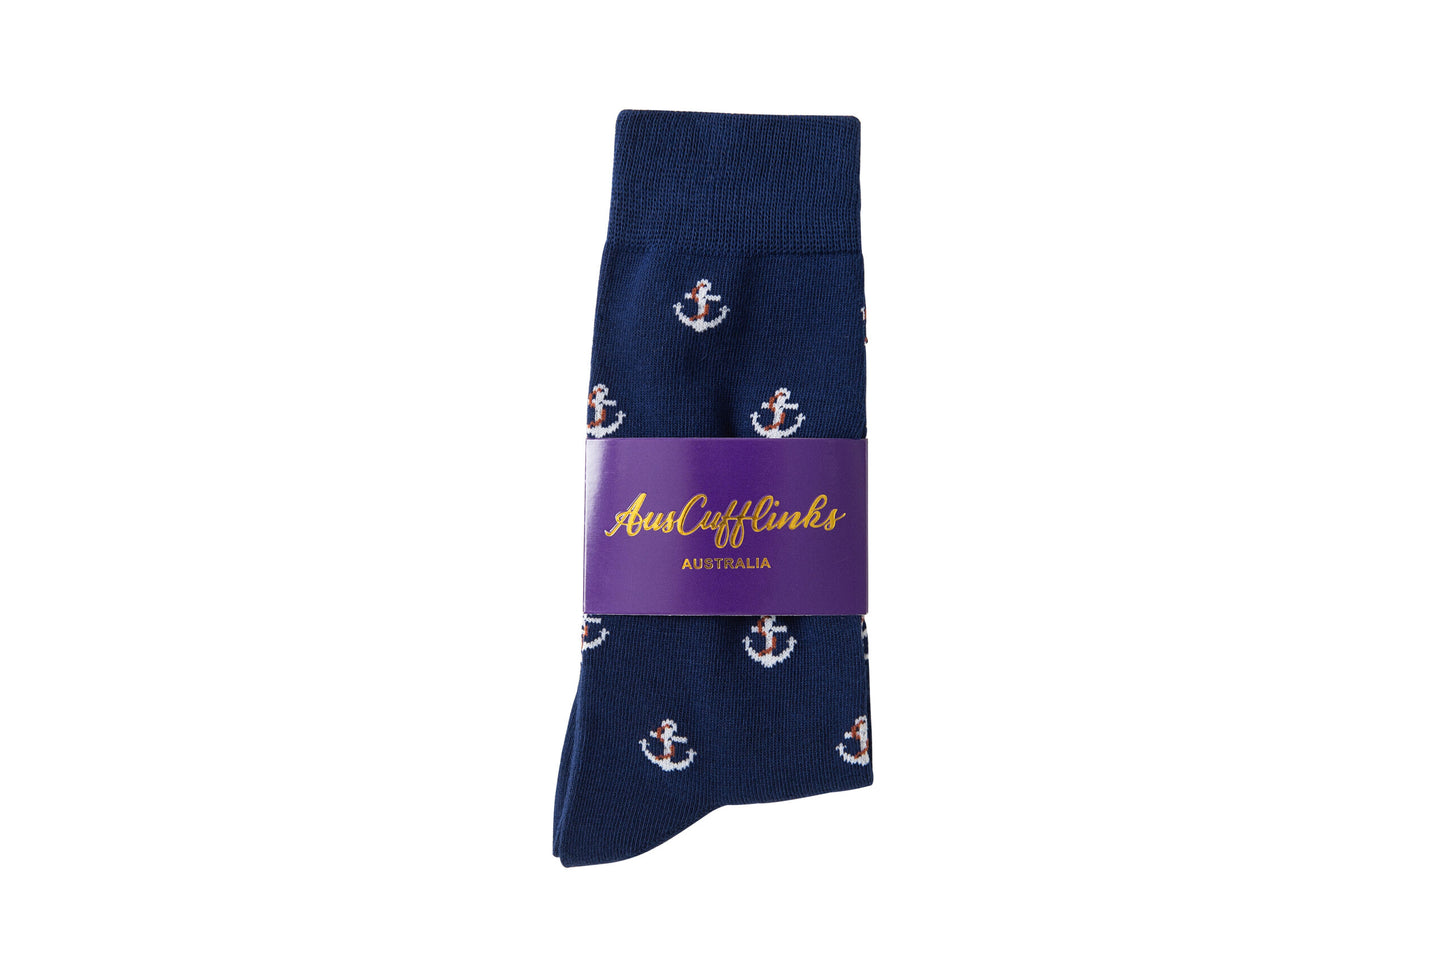 A blue Anchor Sock with white anchors on it.